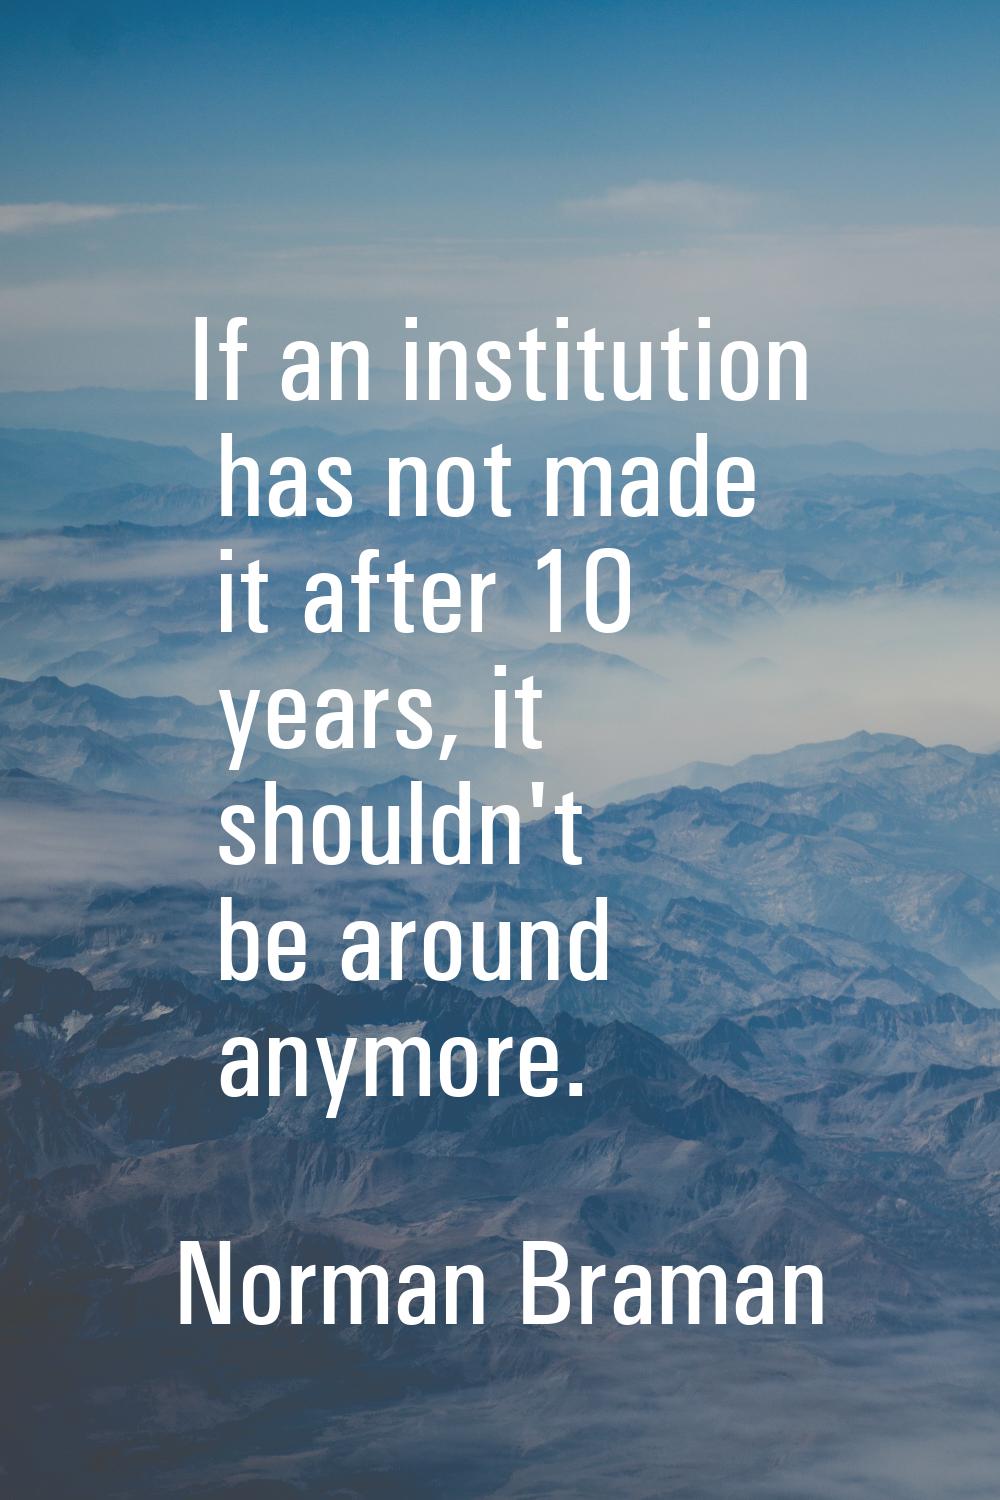 If an institution has not made it after 10 years, it shouldn't be around anymore.